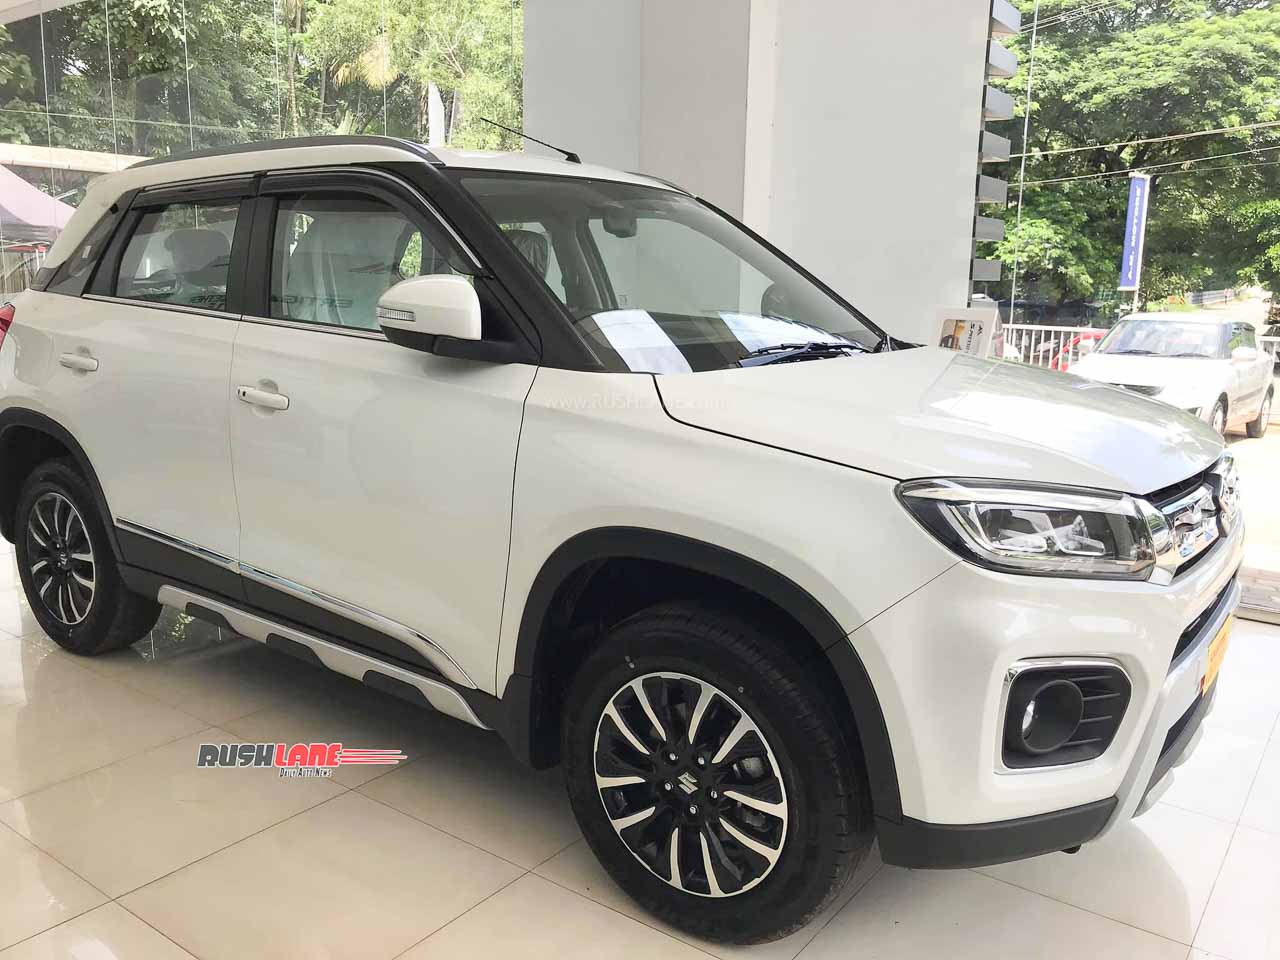 2022 Maruti Brezza New Details Emerge - Expected To Get 6 Speed AT